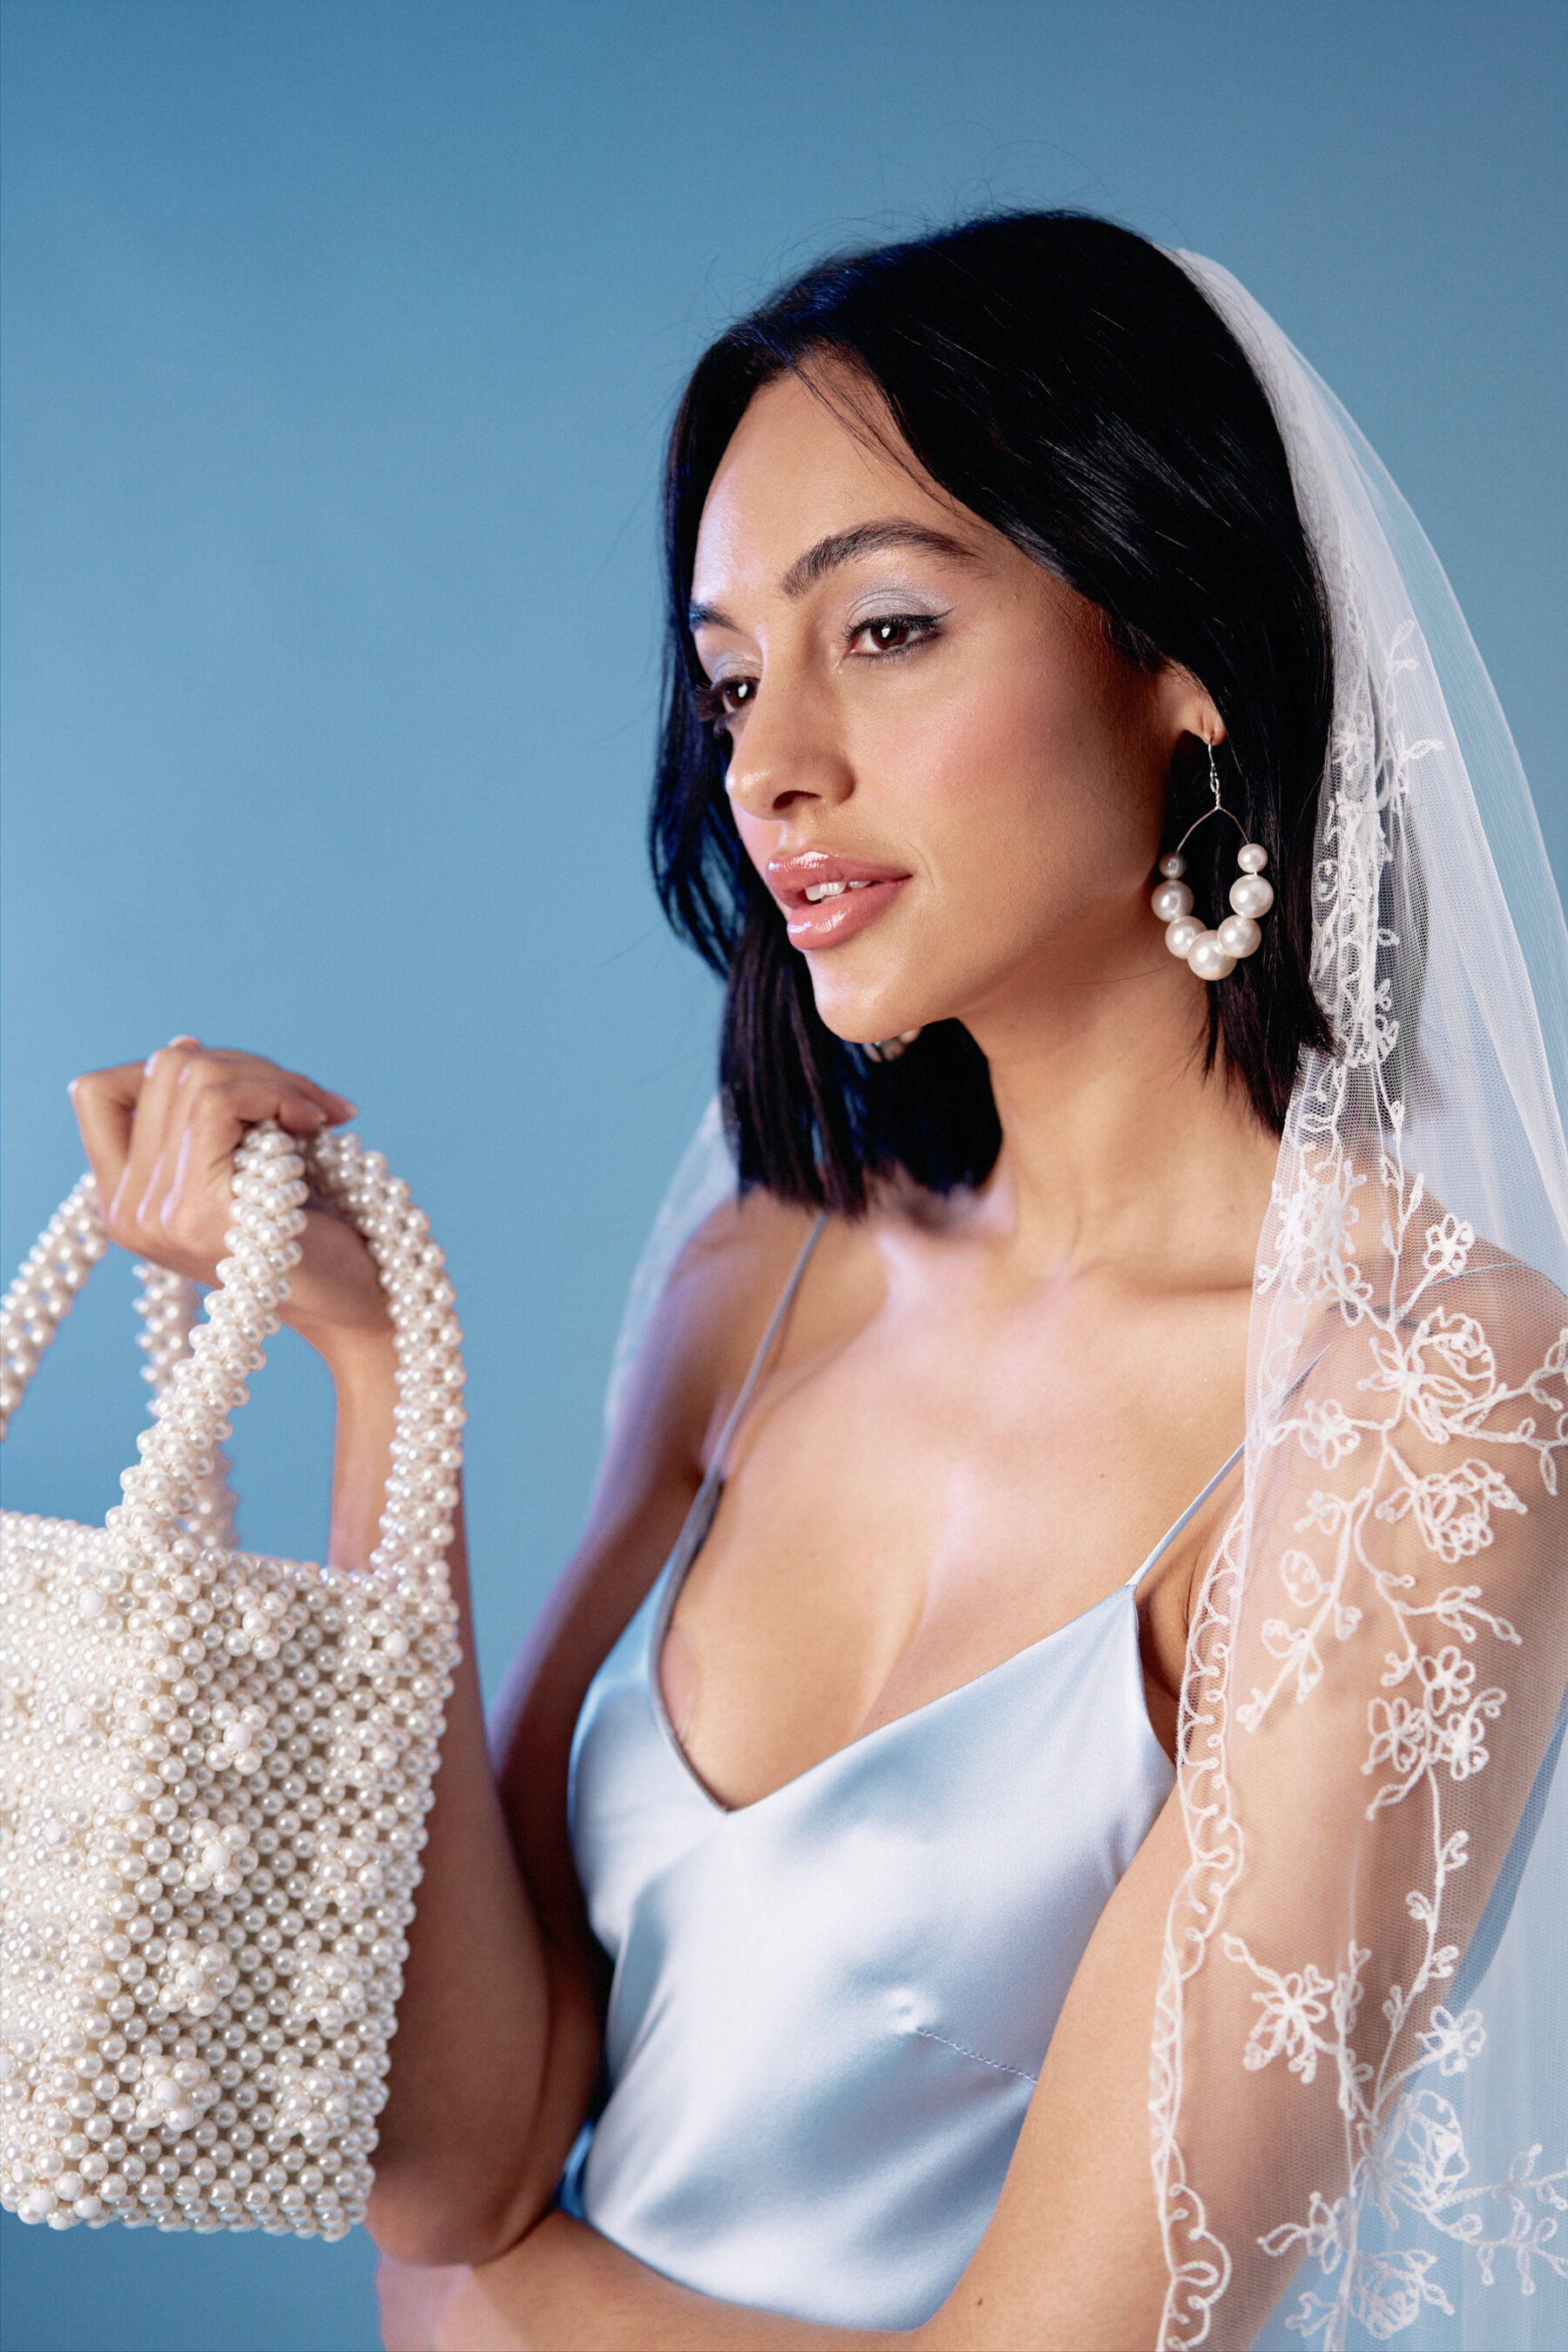 Pale blue wedding dress by Kate Beaumont. Bride carries a Shrimps pearl bag and wears and embroidered wedding veil.